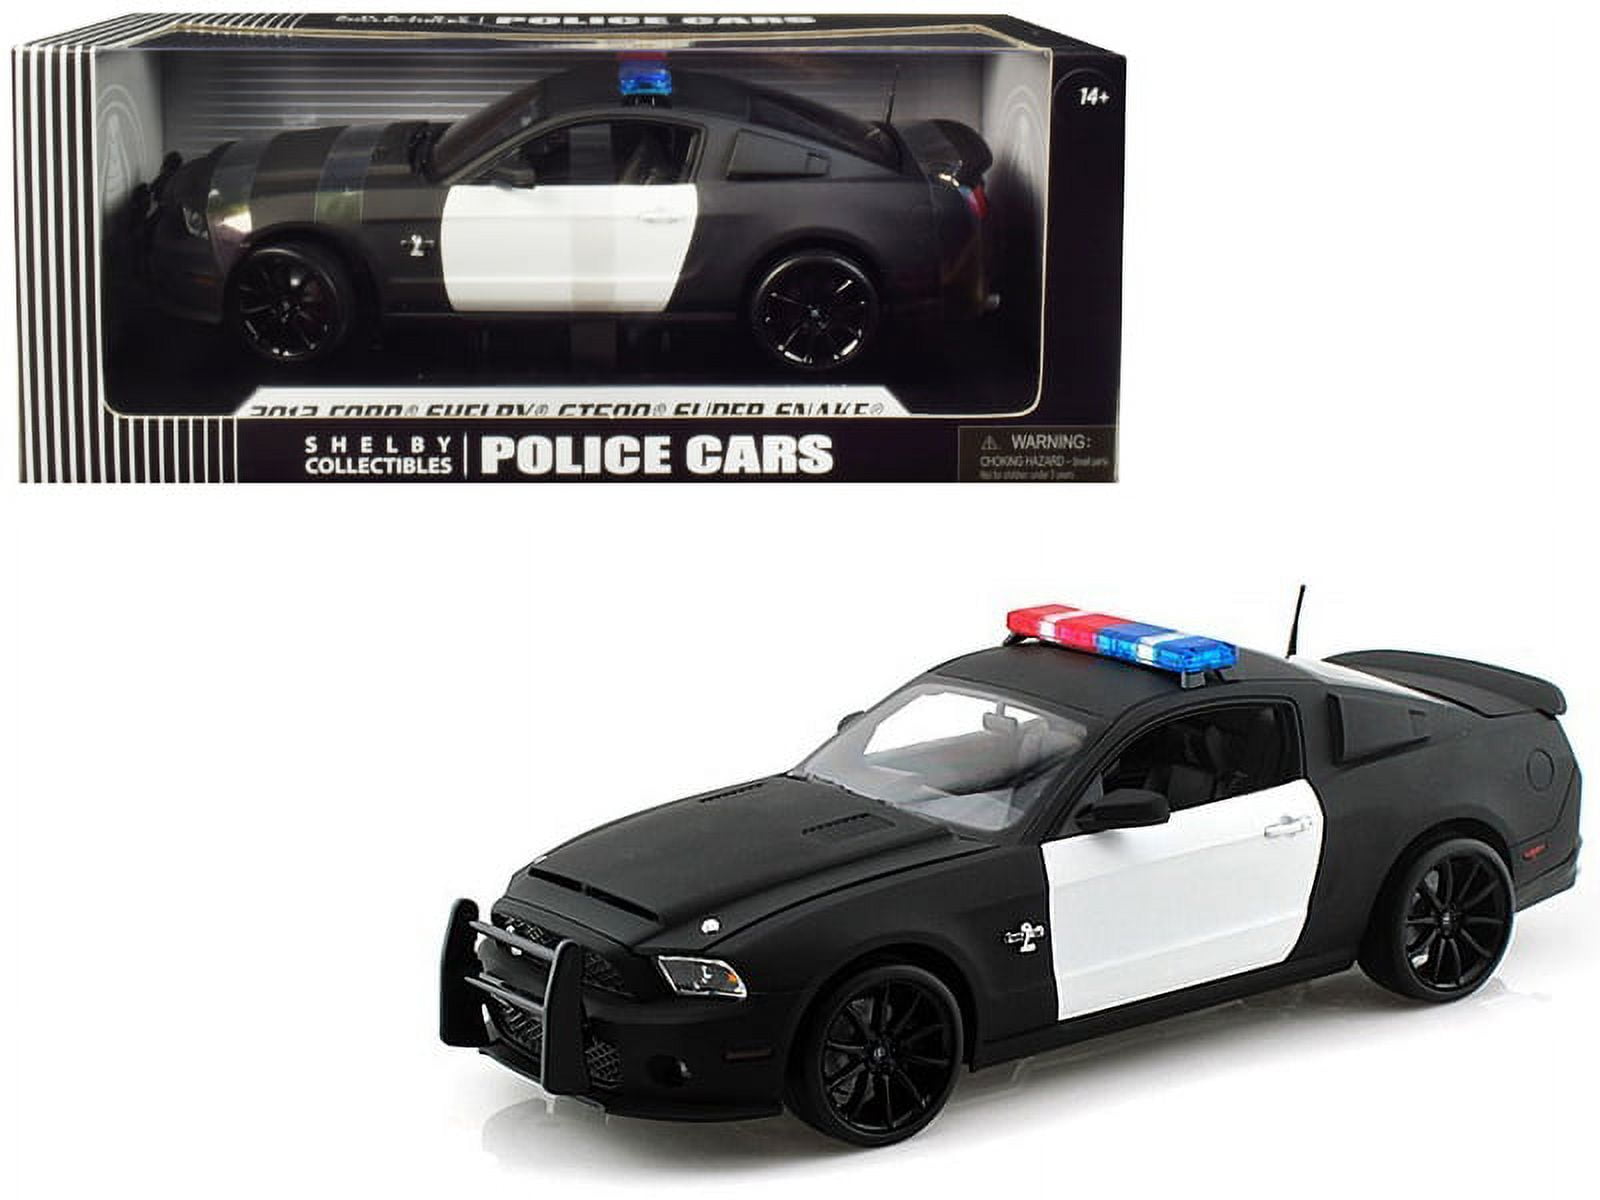 Sc462 2012 Ford Shelby Mustang Gt500 Super Snake Unmarked Police Car Black-white 1-18 Diecast Model Car